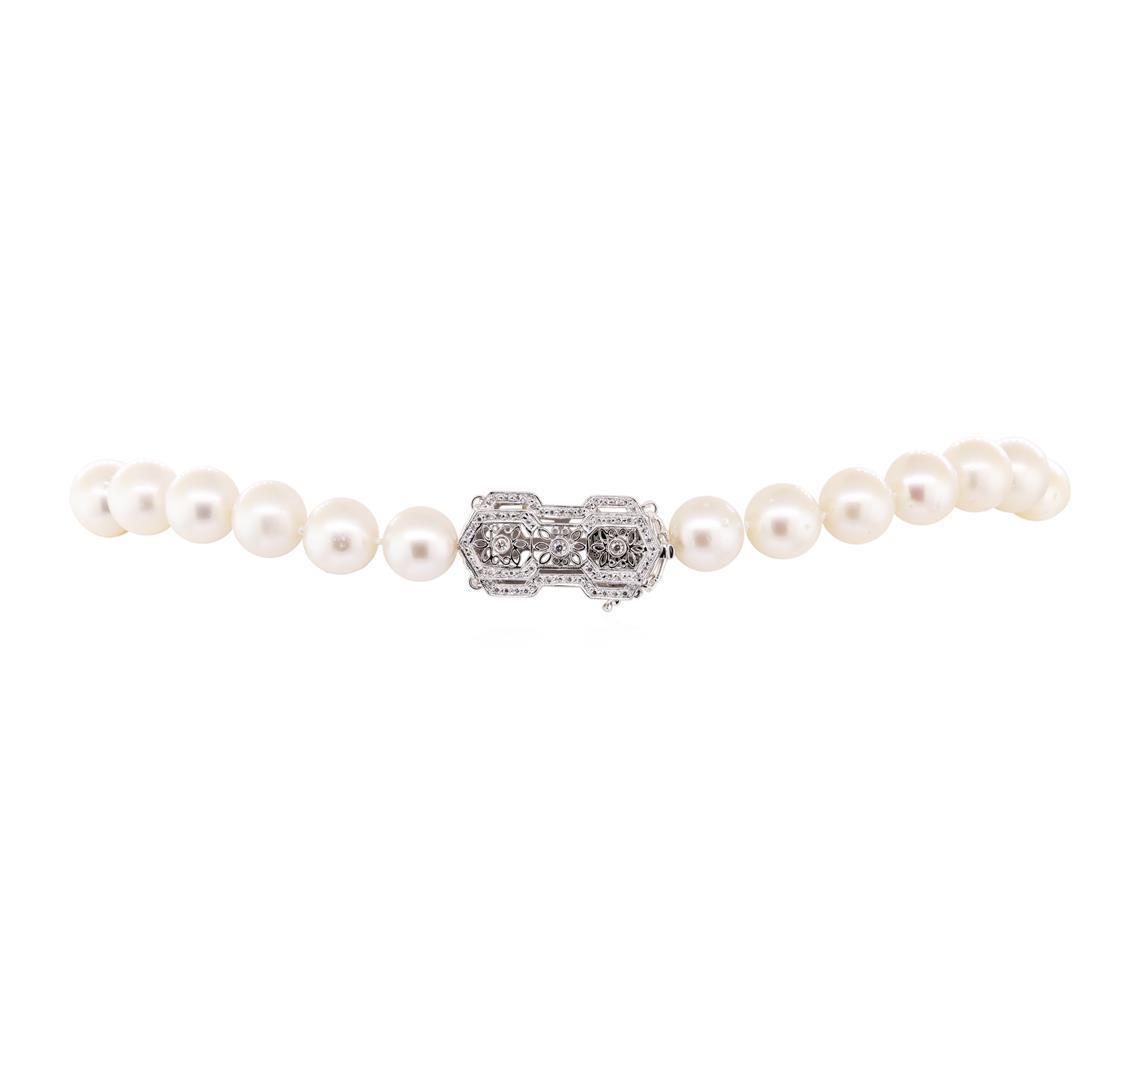 0.71 ctw Diamond and South Sea Pearl Necklace - 14KT White Gold